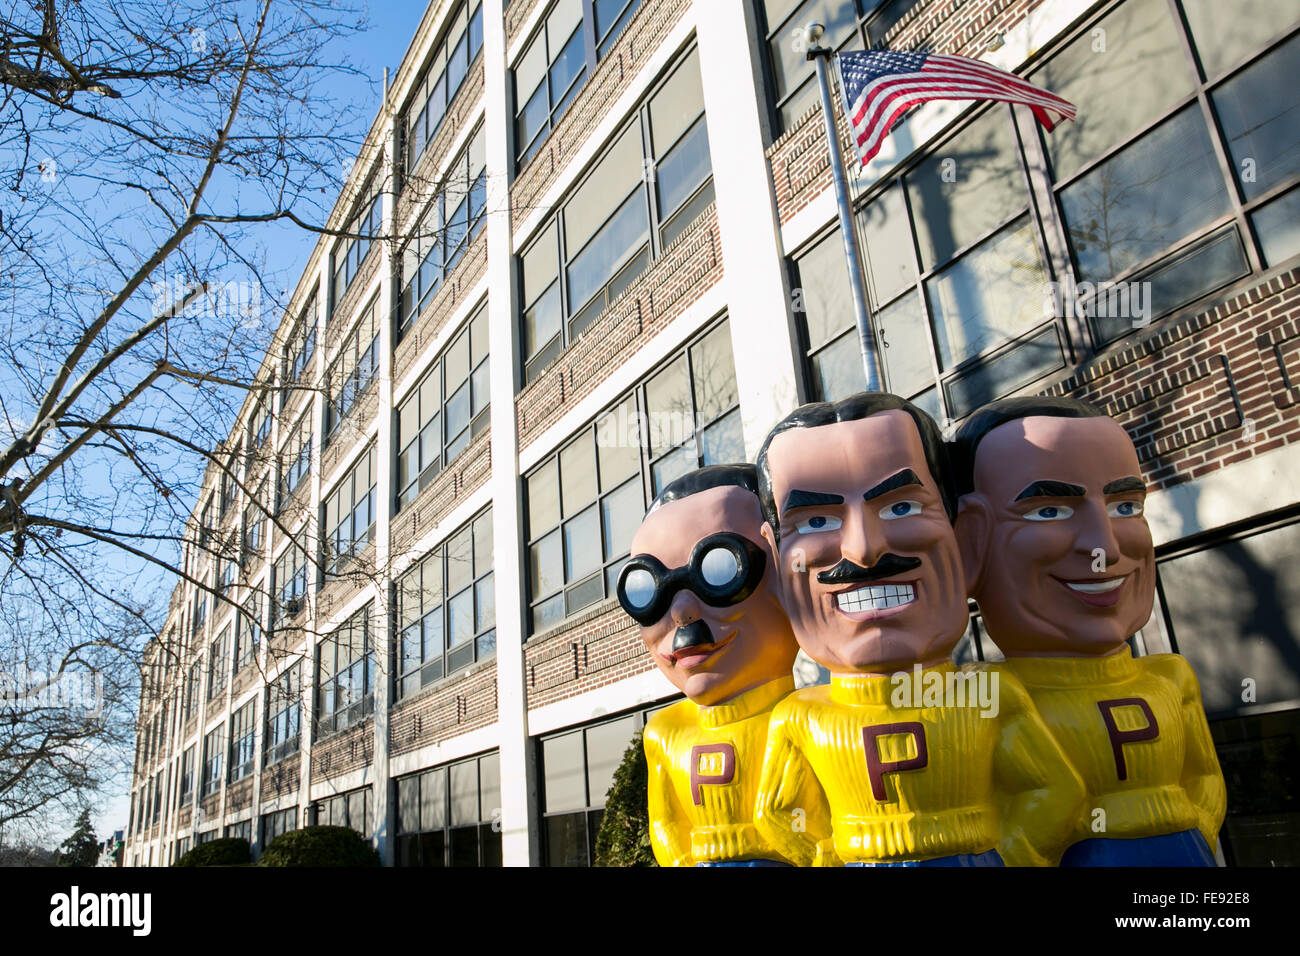 A statue of the Pep Boys: Manny, Moe & Jack outside of the headquarters of Pep Boys in Philadelphia, Pennsylvania on January 3,  Stock Photo